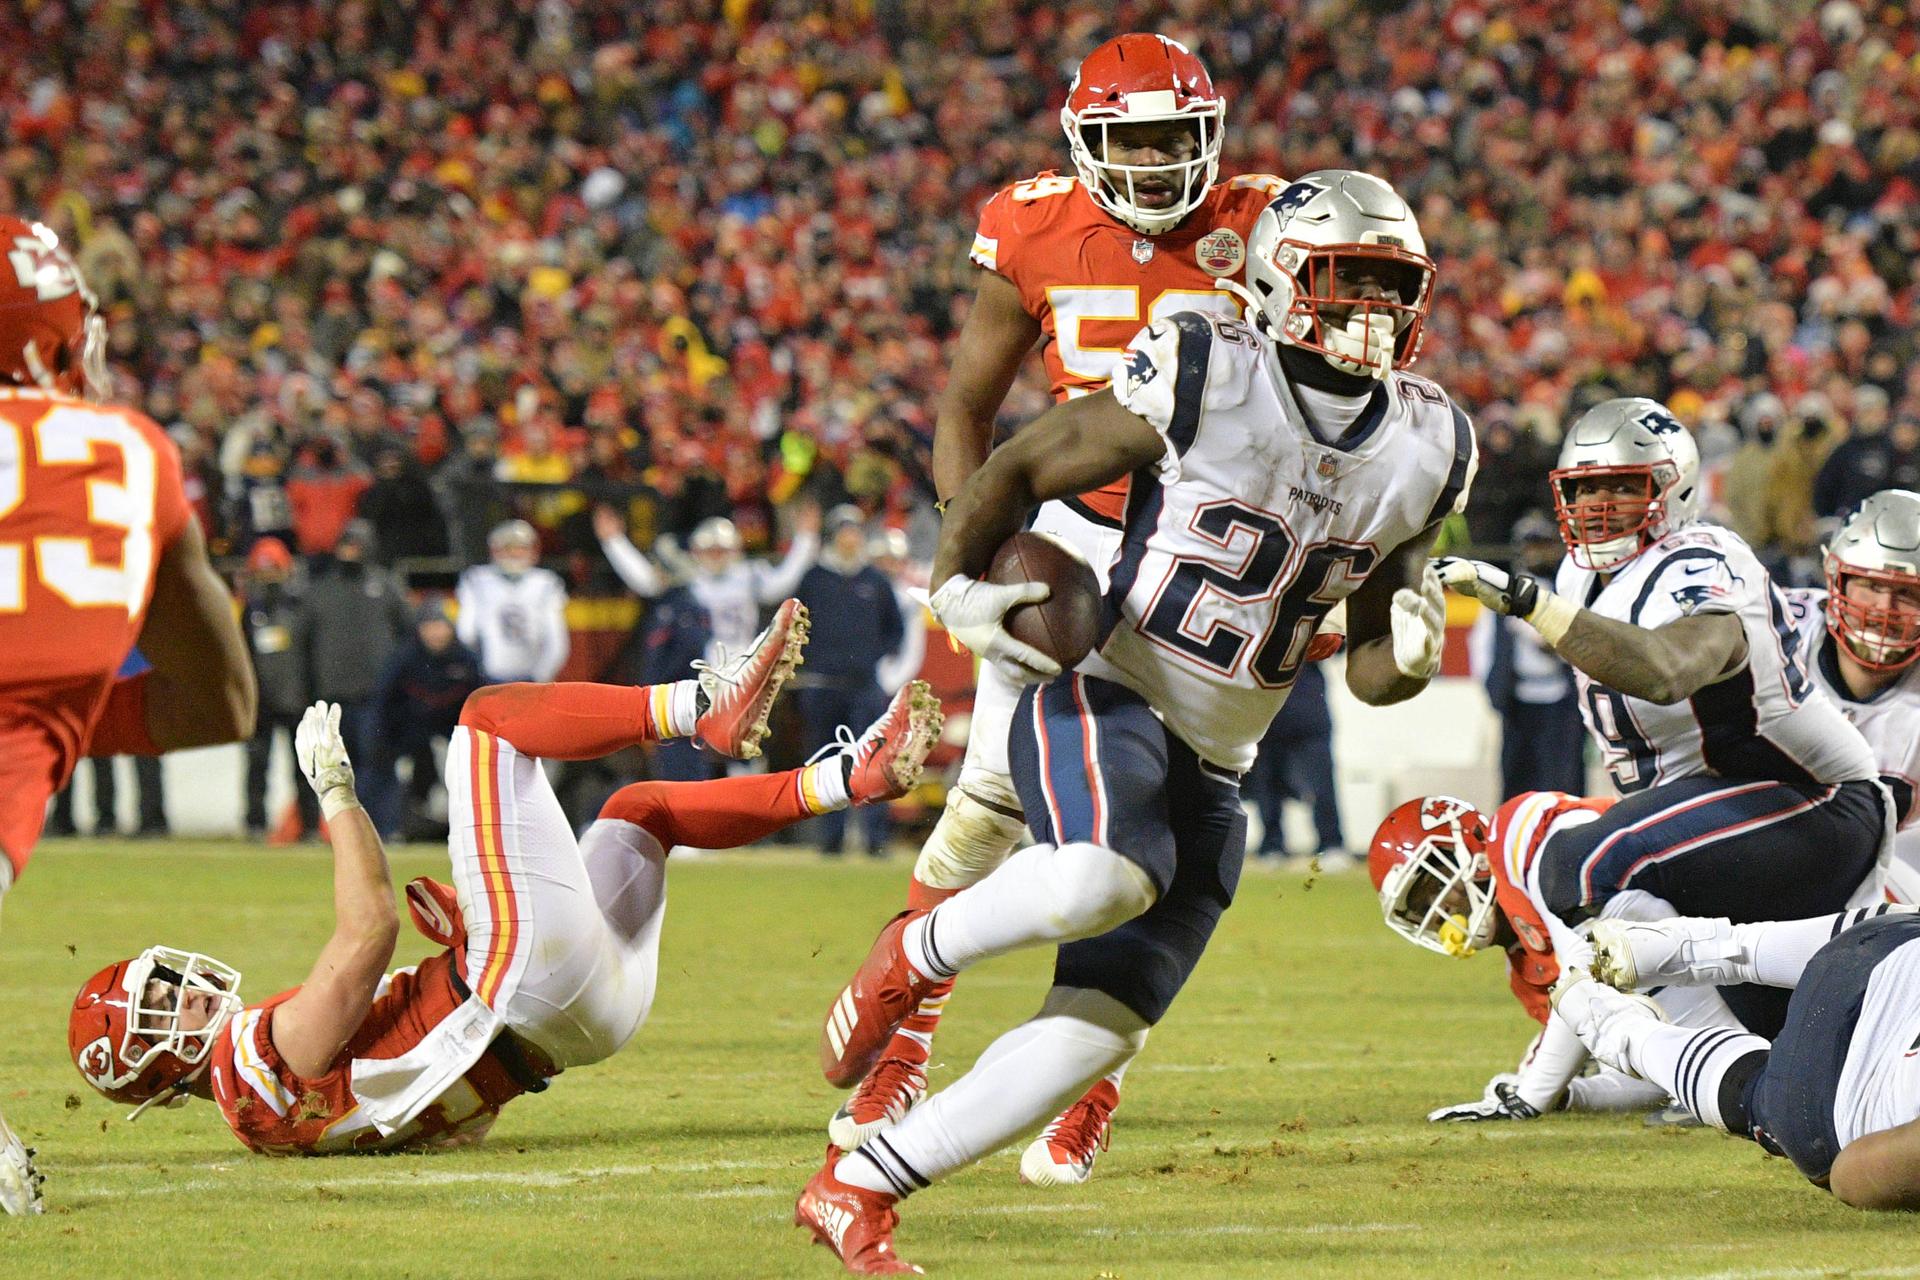 New England Patriots running back Sony Michel played a large role in helping the Patriots win the AFC Title Game and reach the Super Bowl. Michel was born and raised in Florida, but is the son of Haitian immigrants.